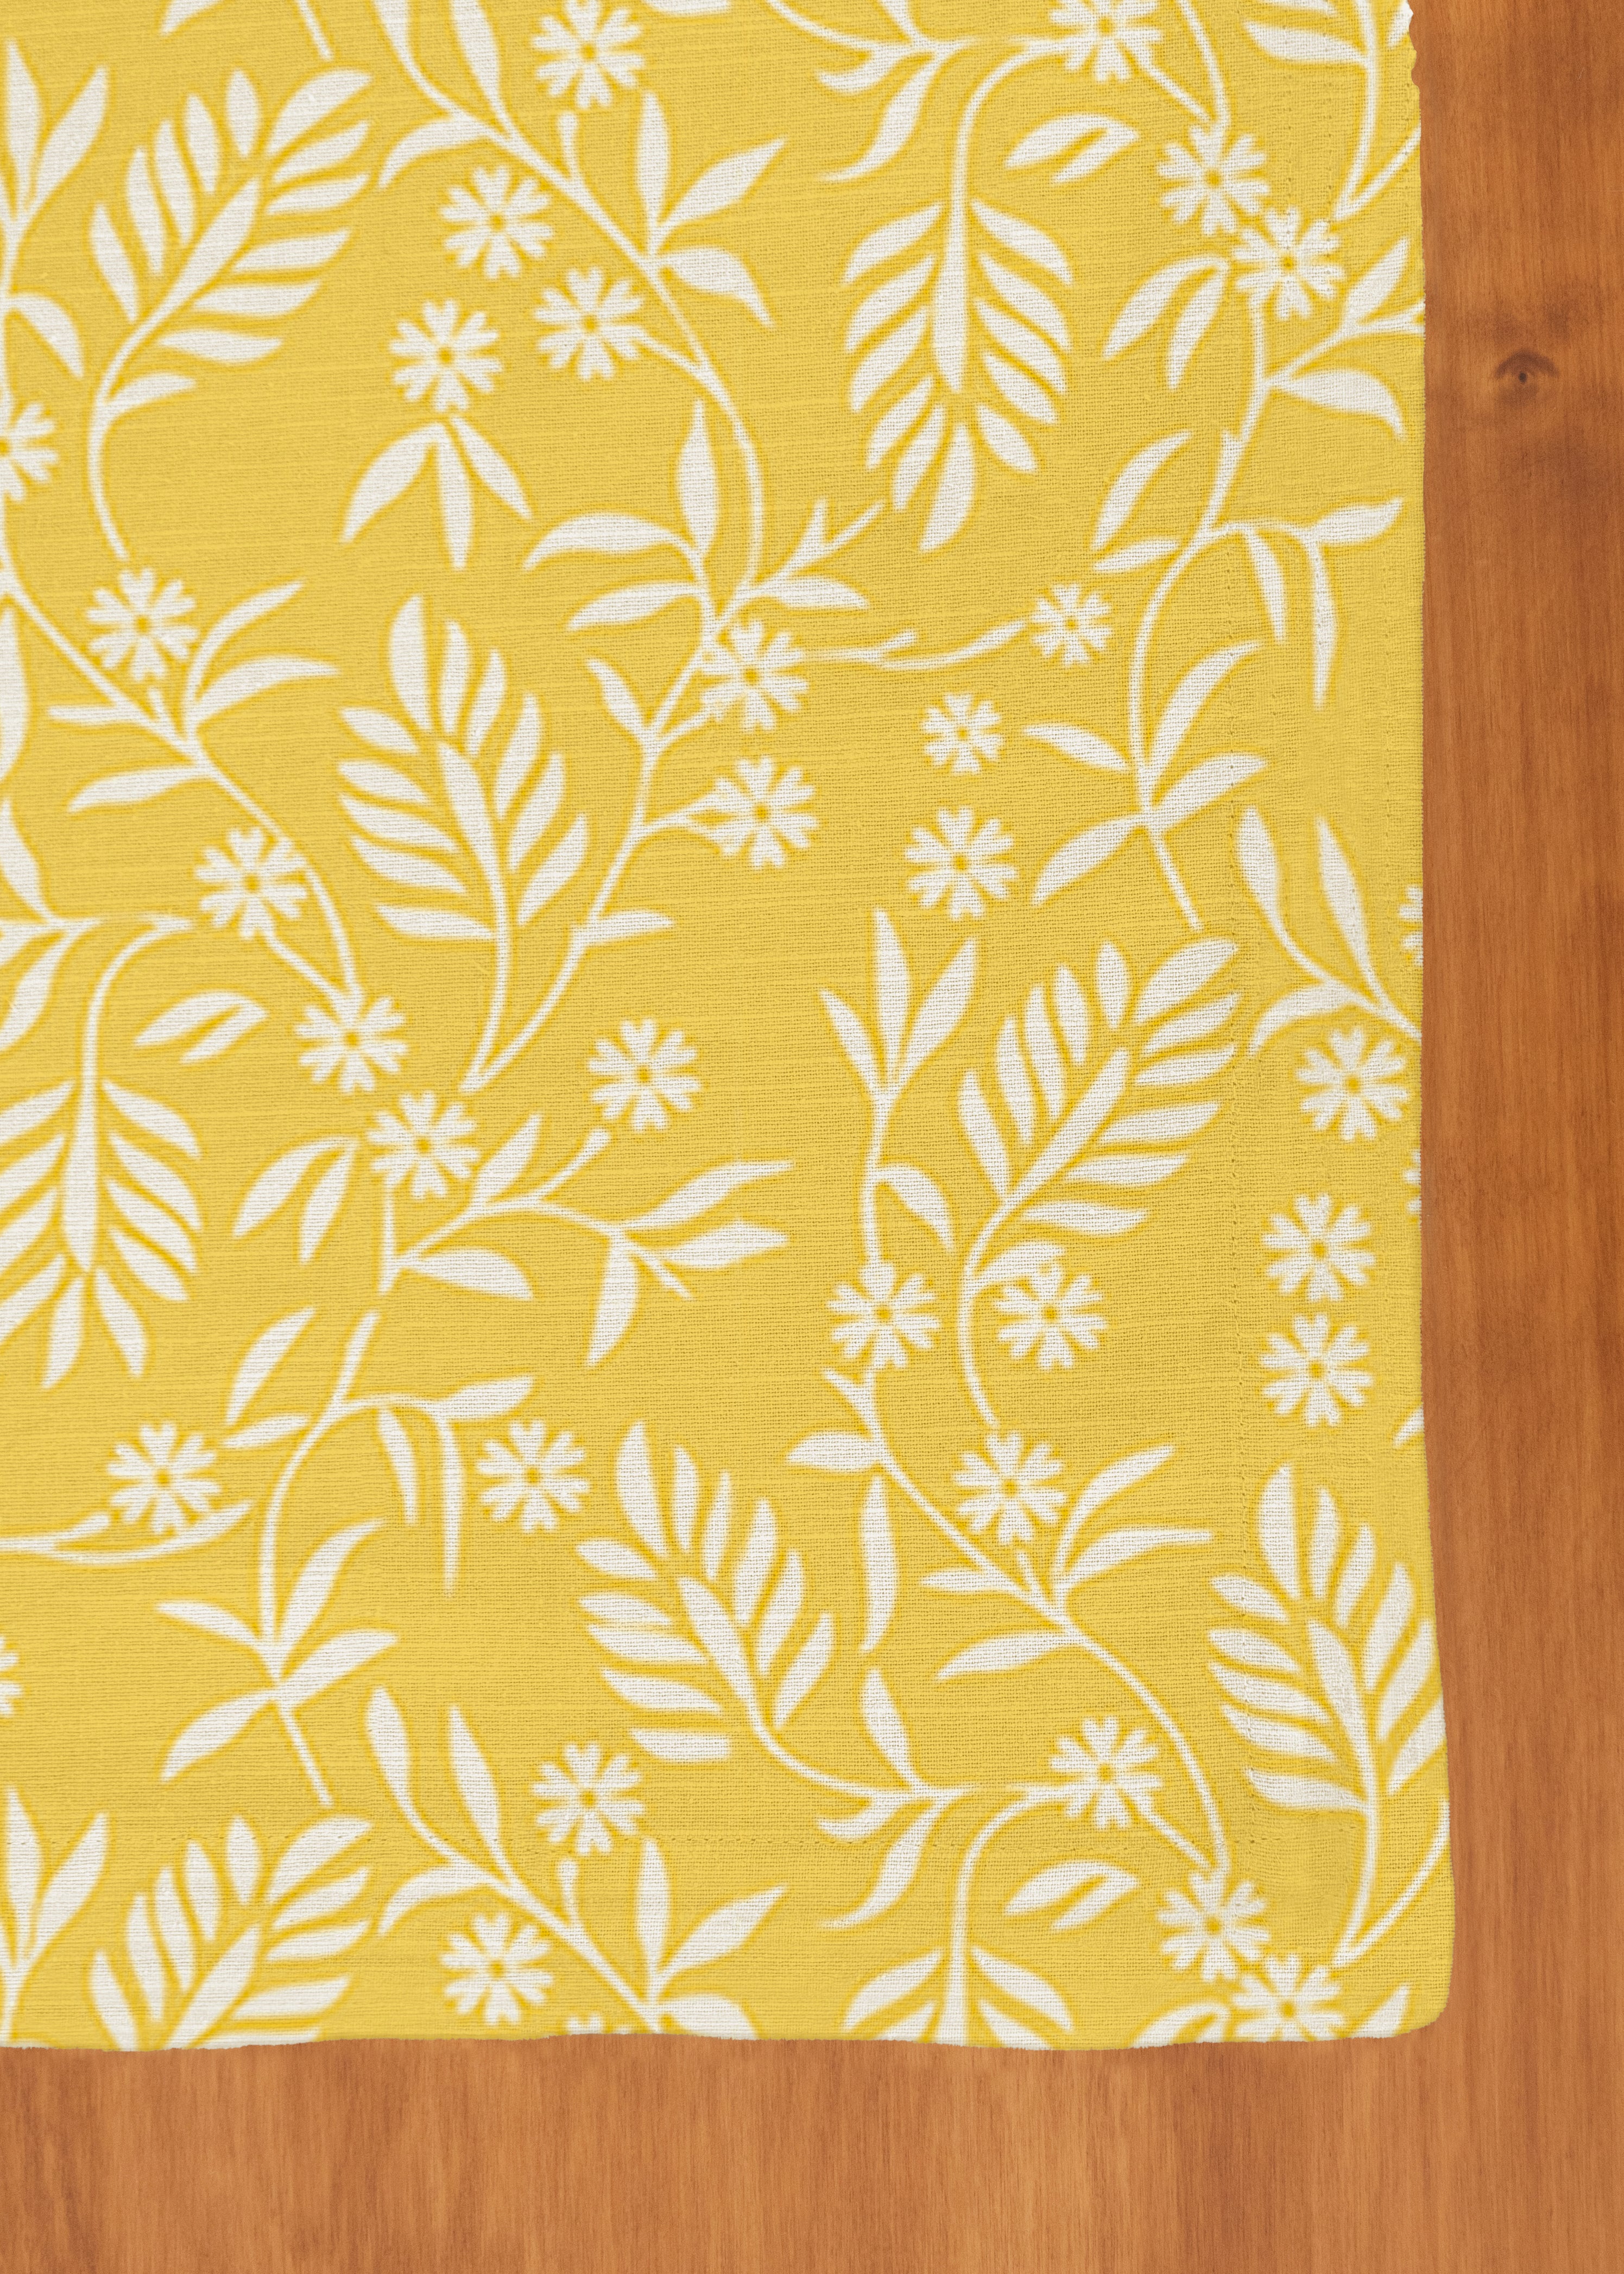 Daisy Printed 100% cotton floral table cloth for 4 seater or 6 seater dining - Yellow